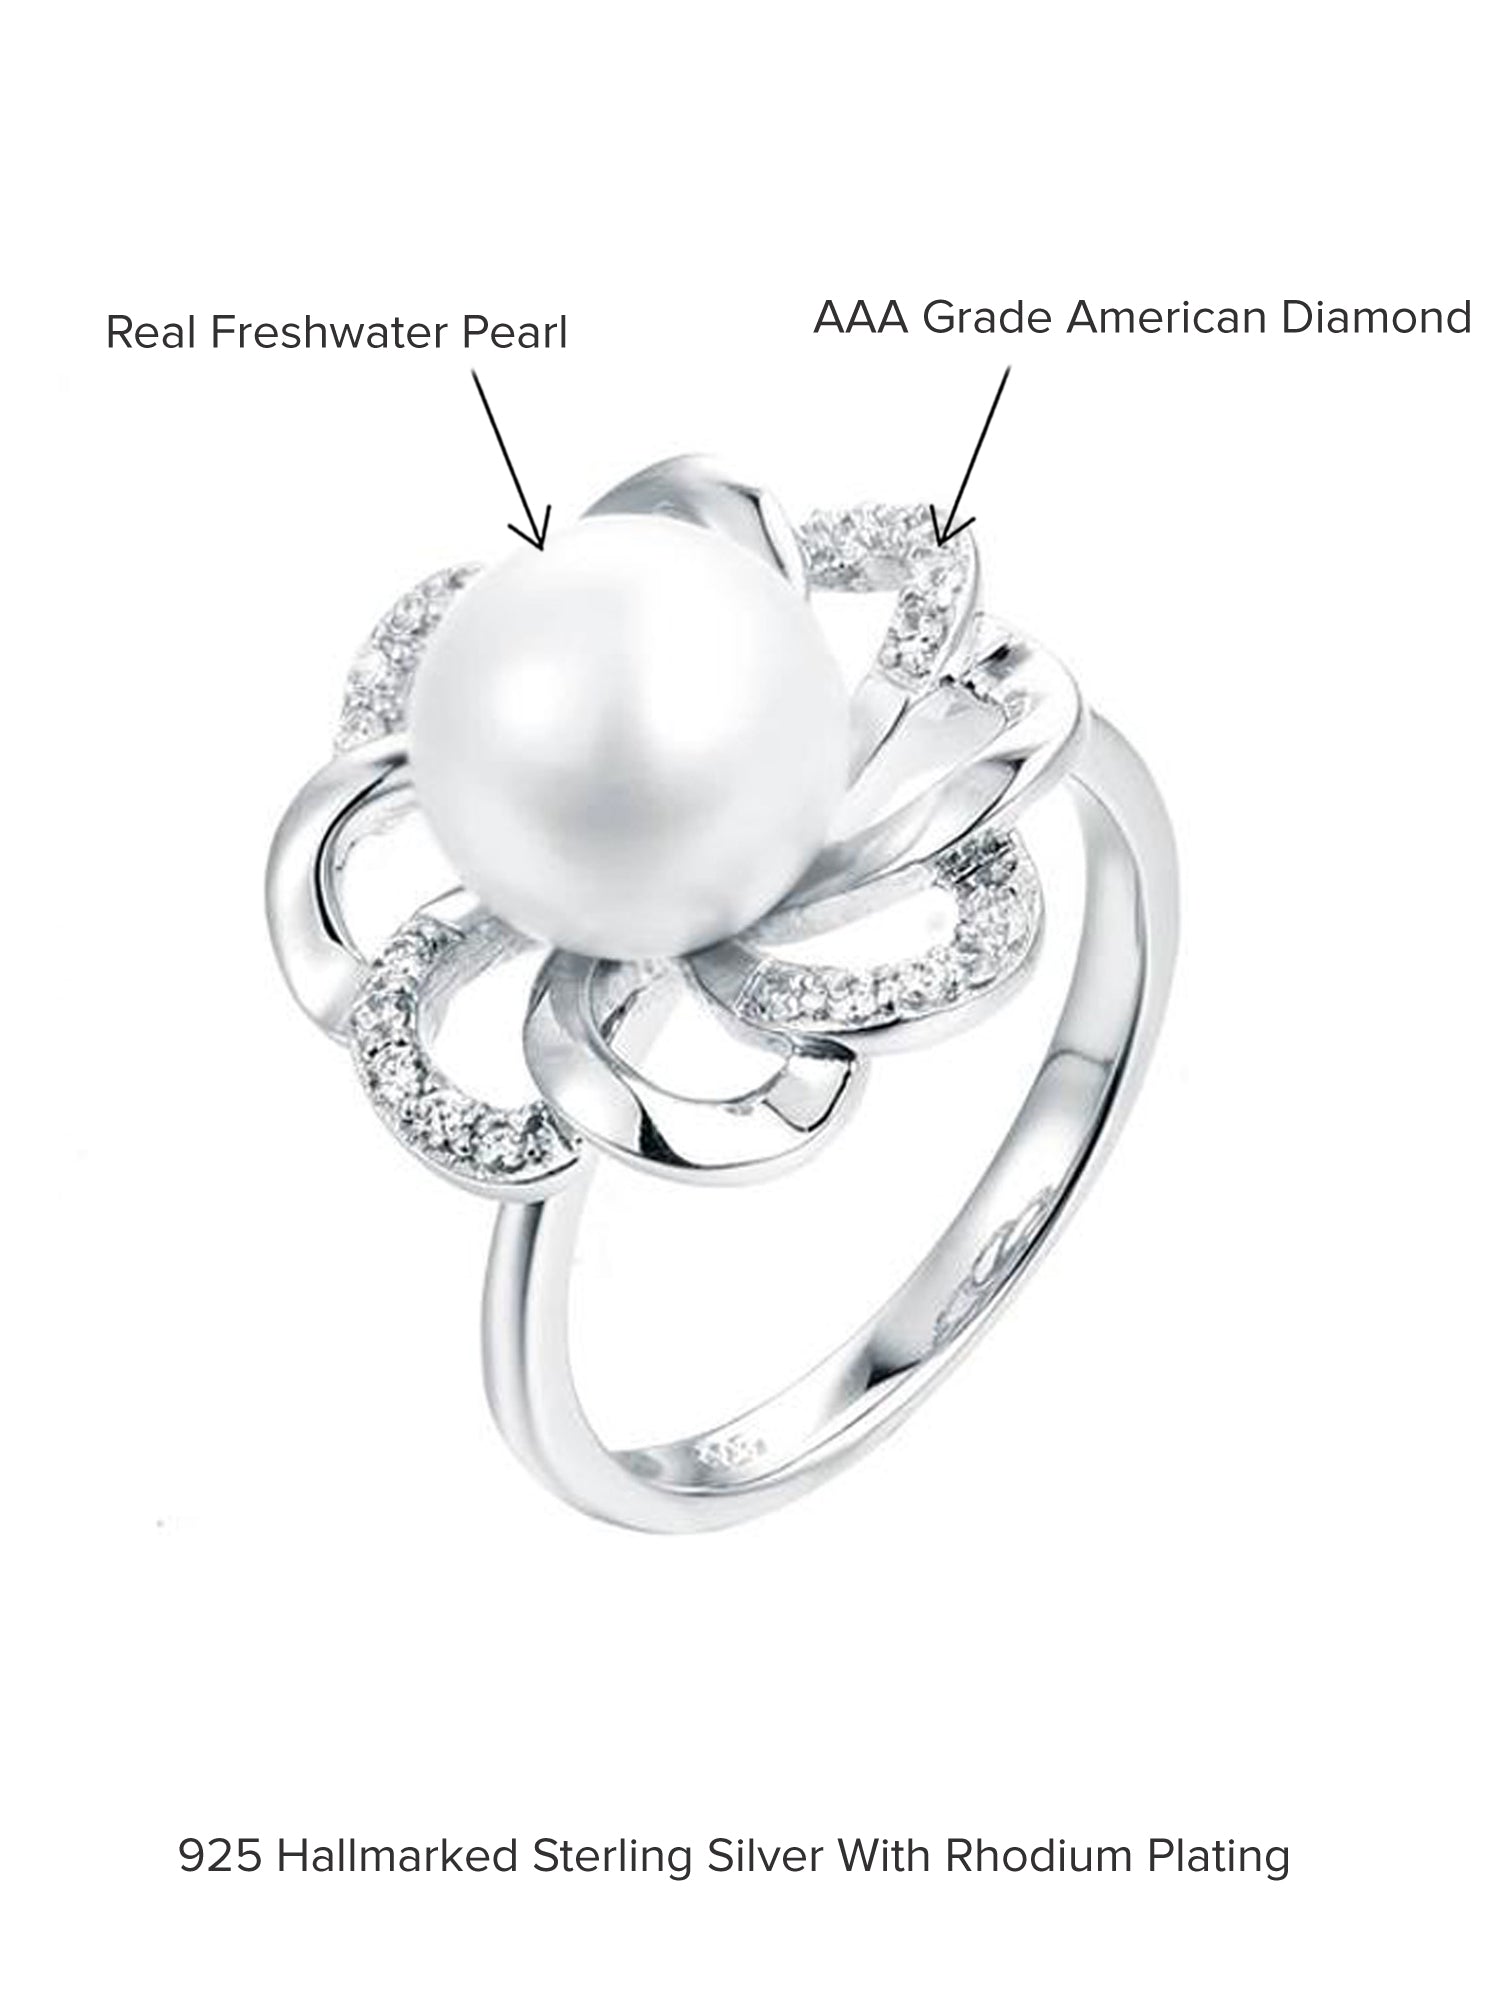 PEARL 925 STERLING SILVER FLOWER RING-4